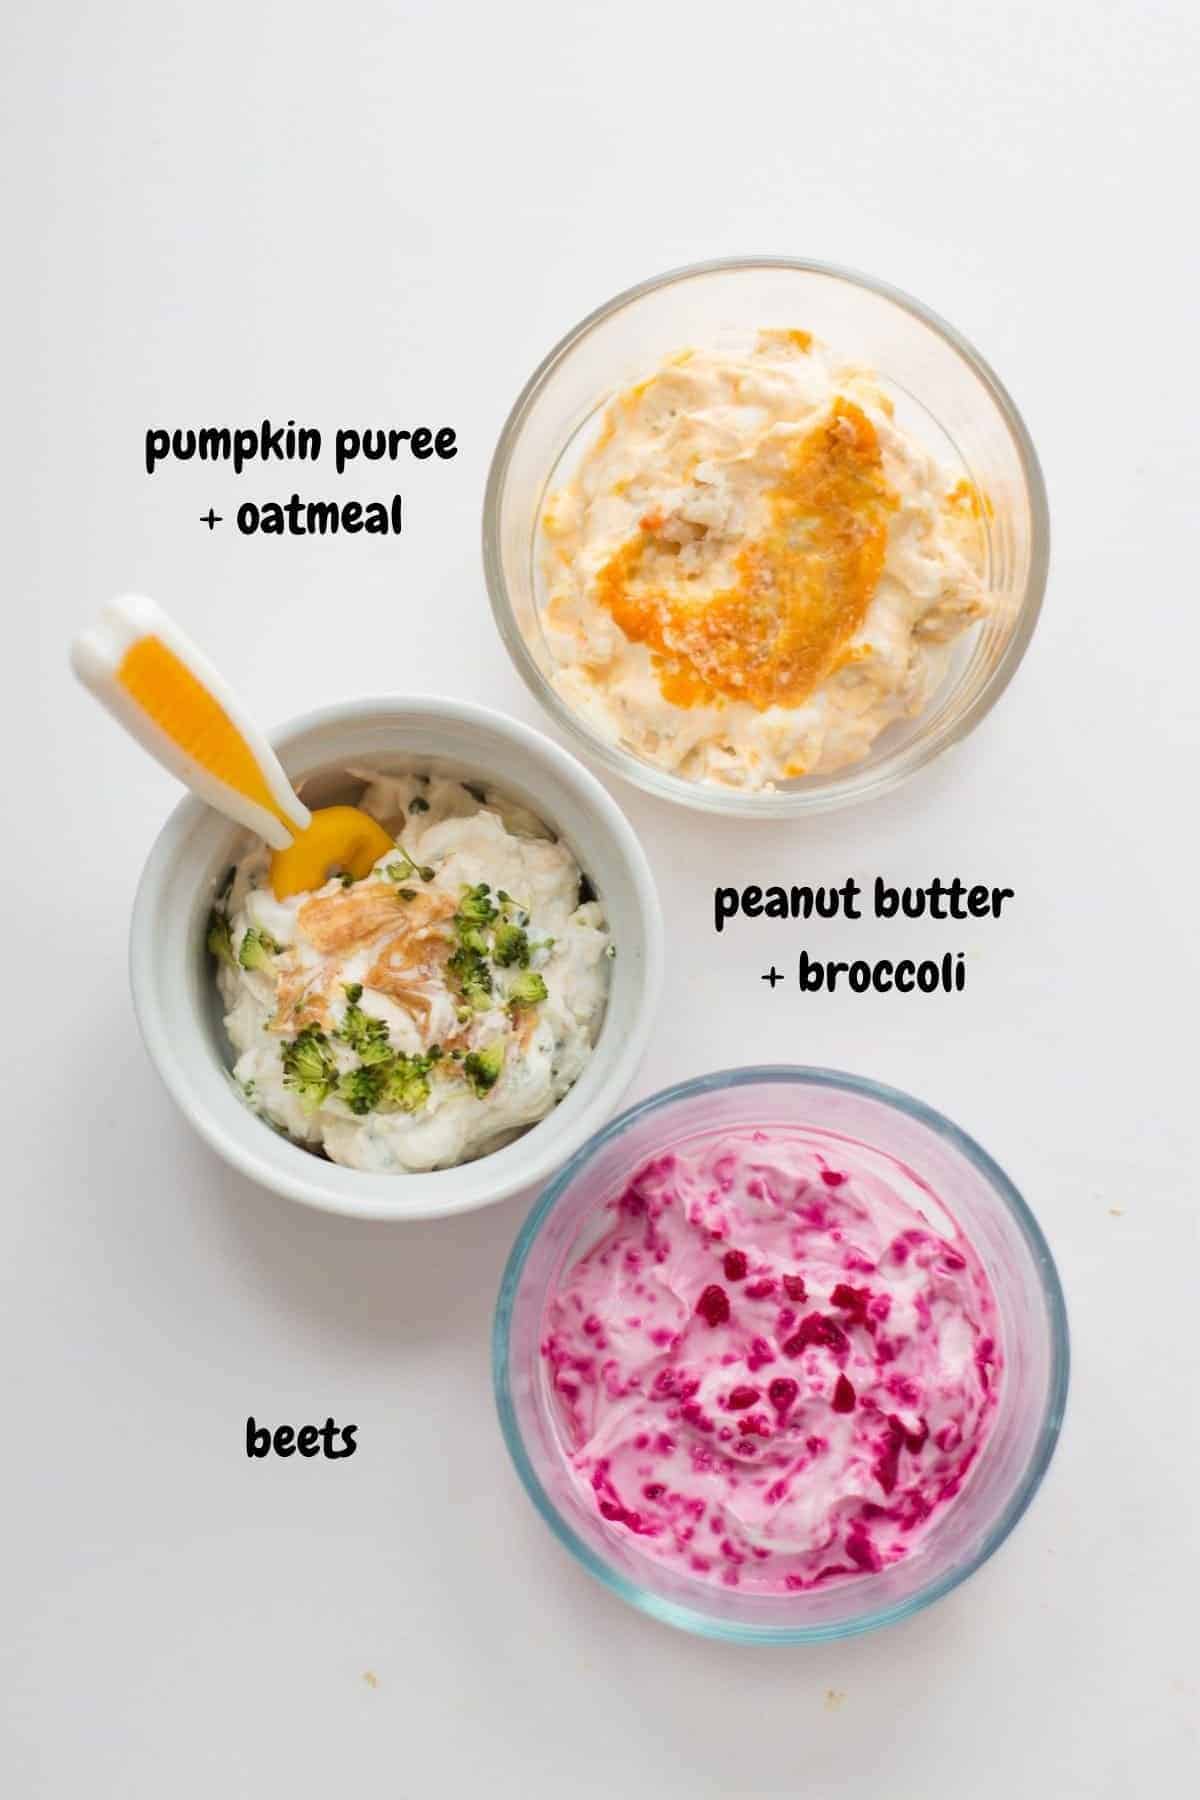 yogurt bowl with beets, second bowl with broccoli and peanut butter, and the third bowl with pumpkin puree and oatmeal.